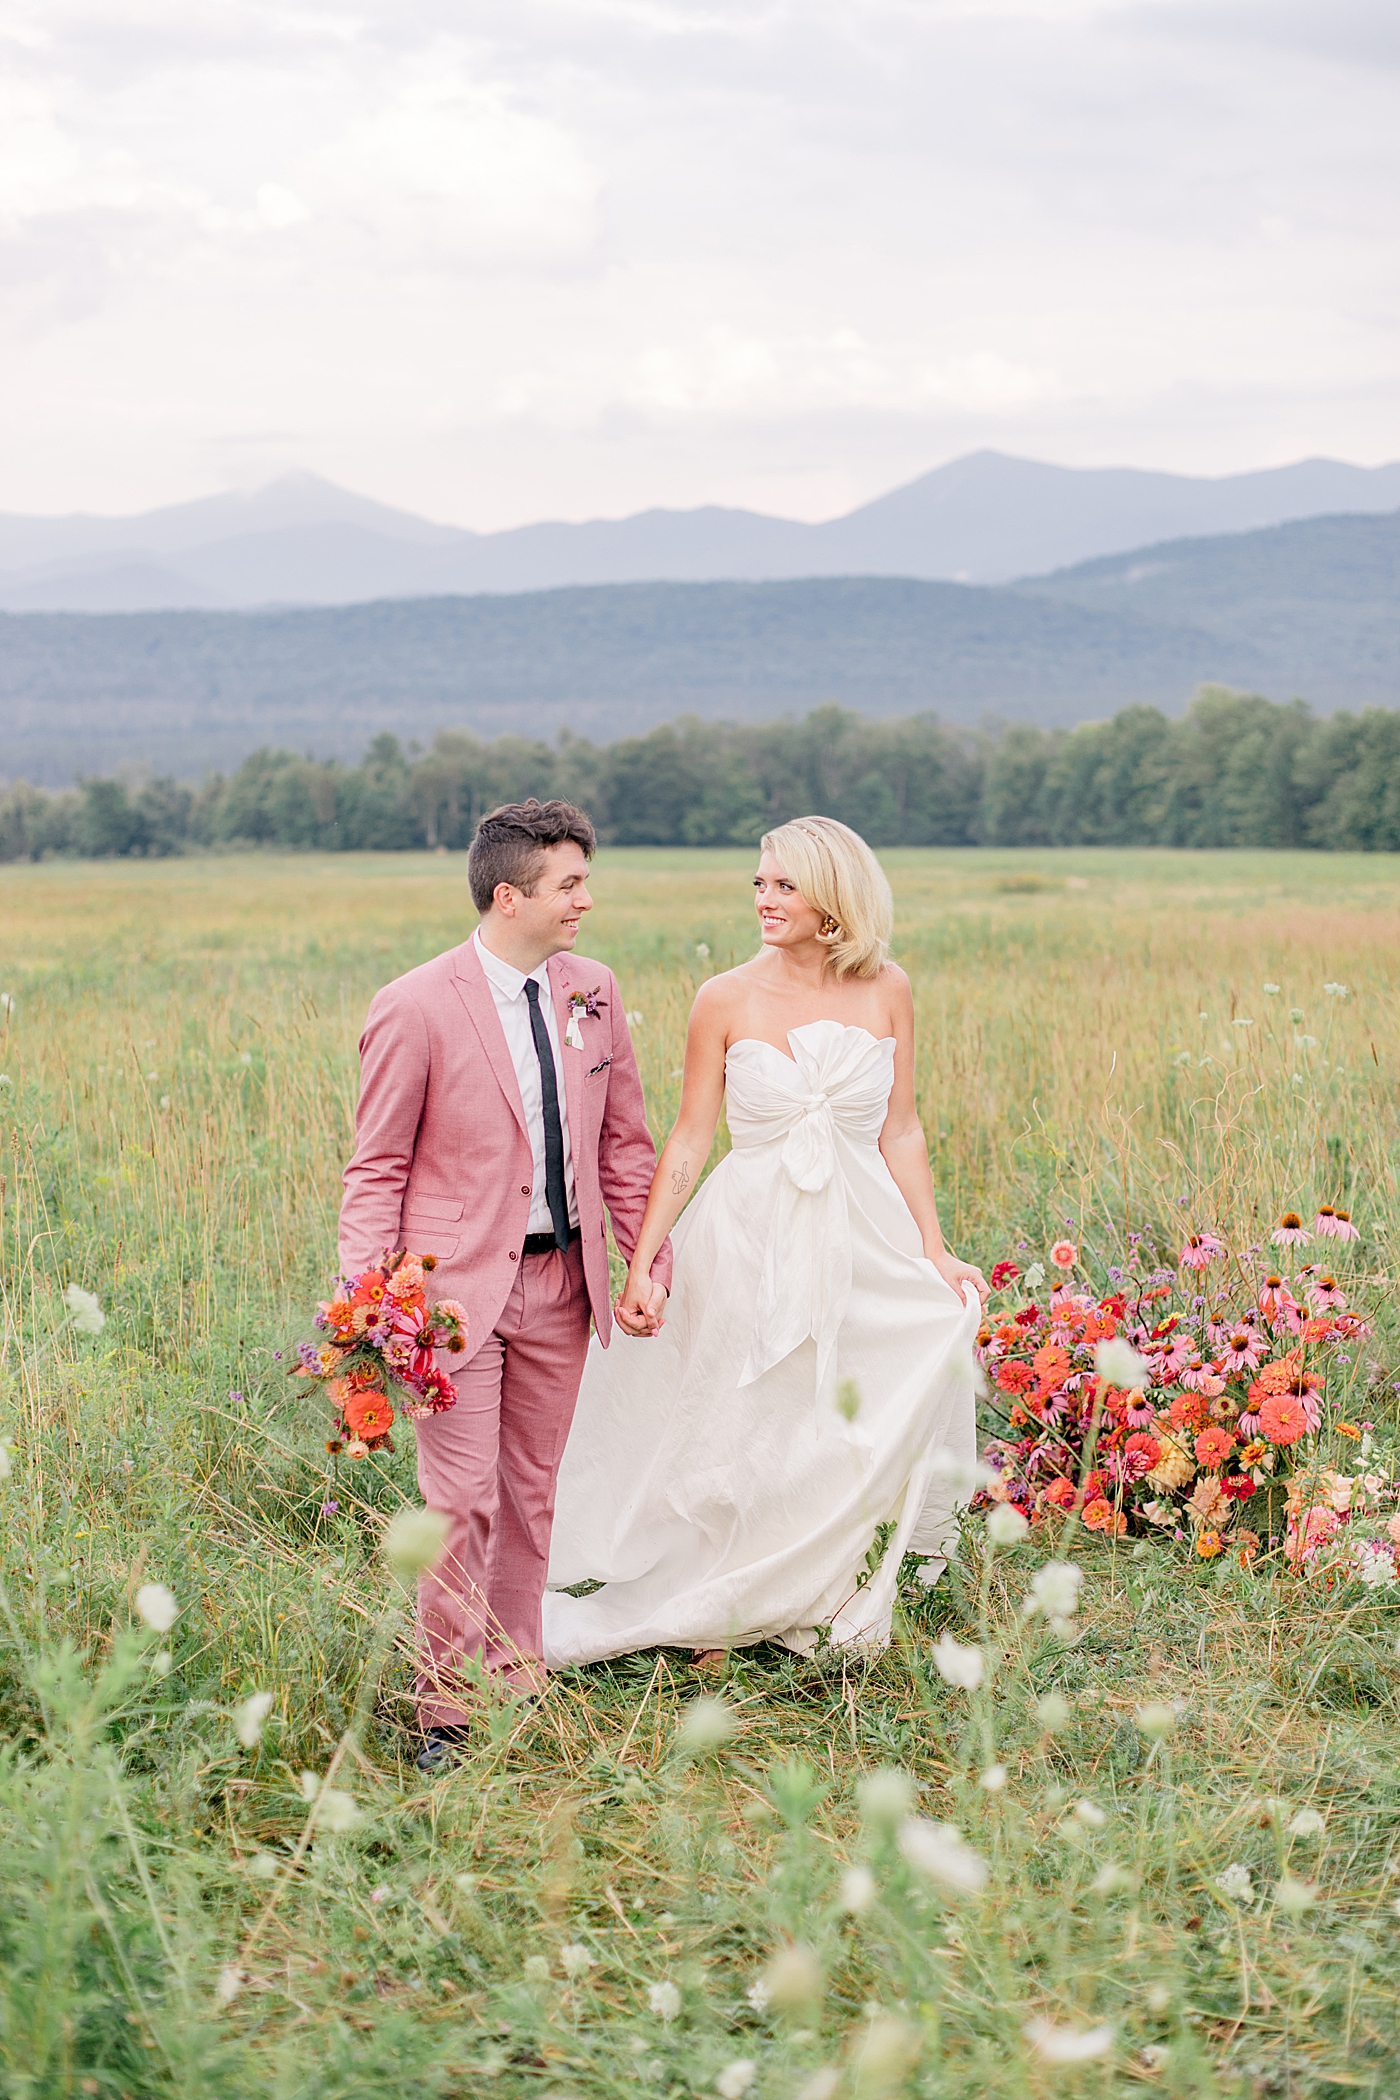 Couple in bright colors walking in a field | Image by Hope Helmuth Photography